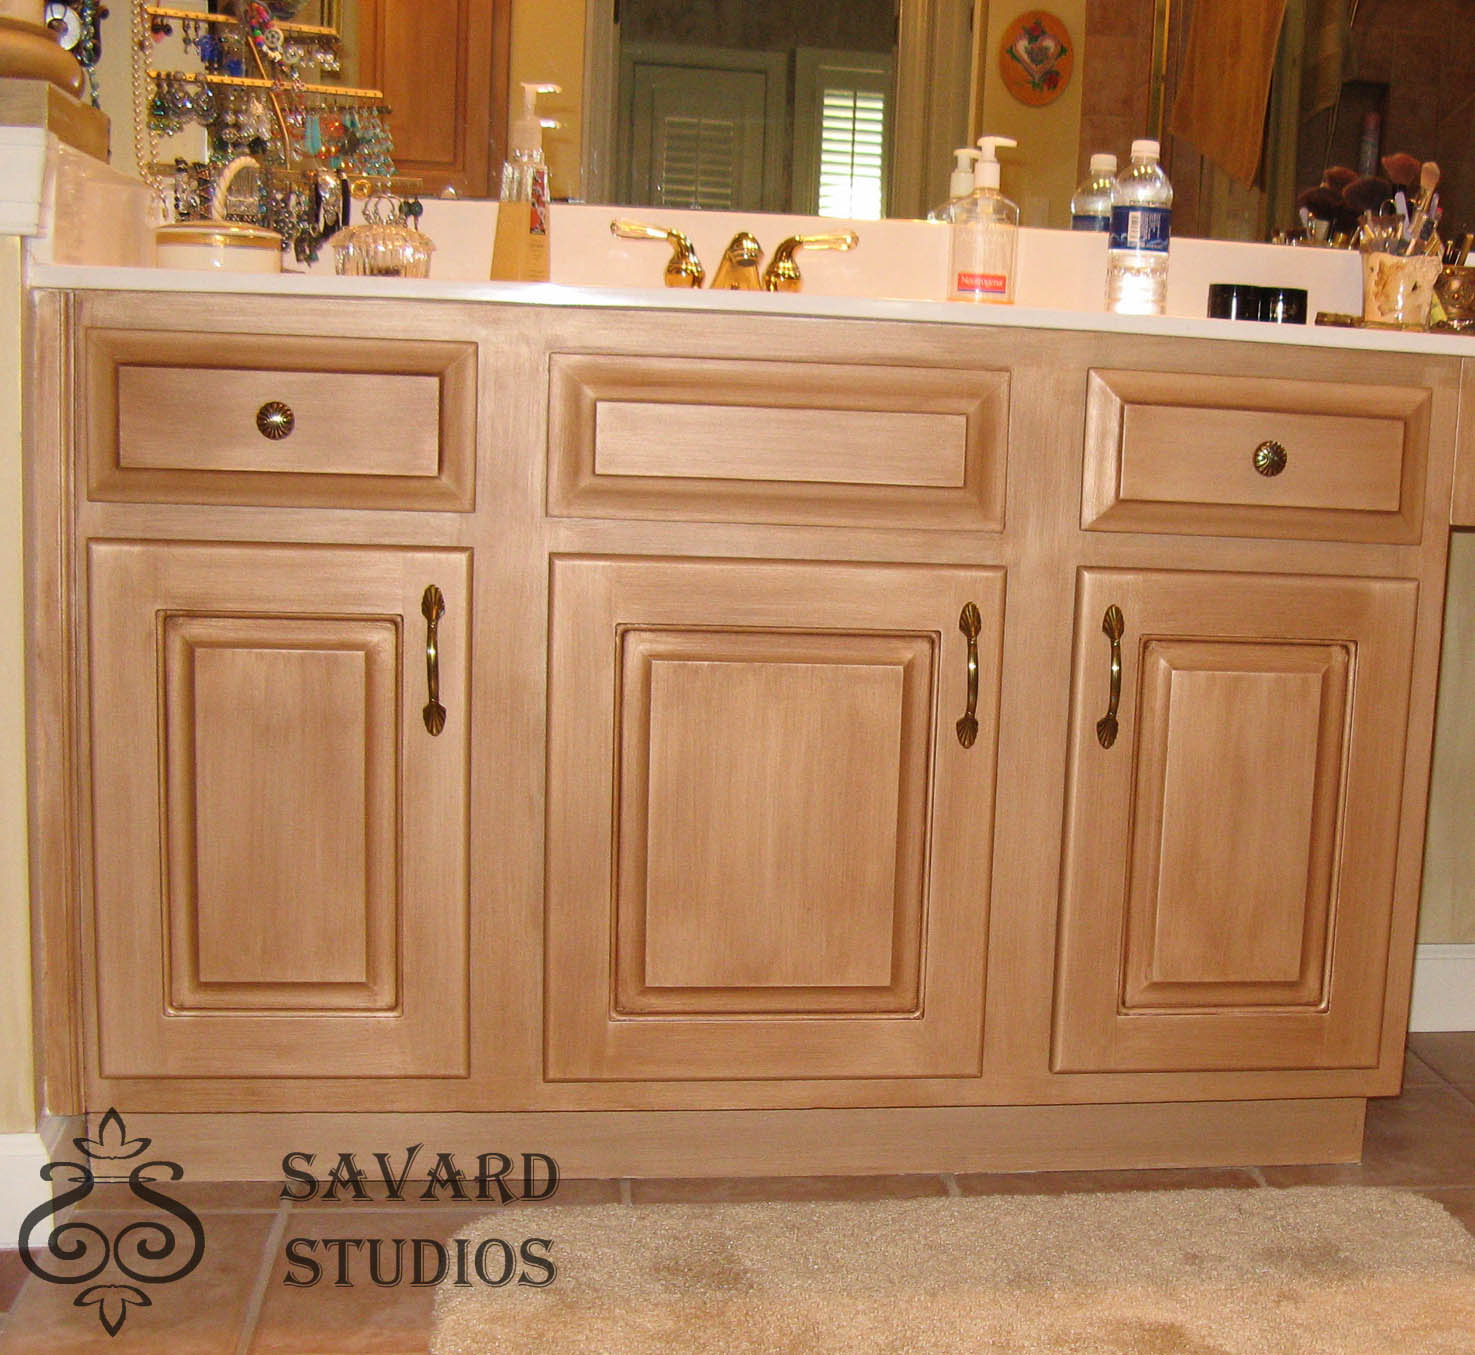 Free Download Amazing Painting Laminate Bathroom Cabinets Before